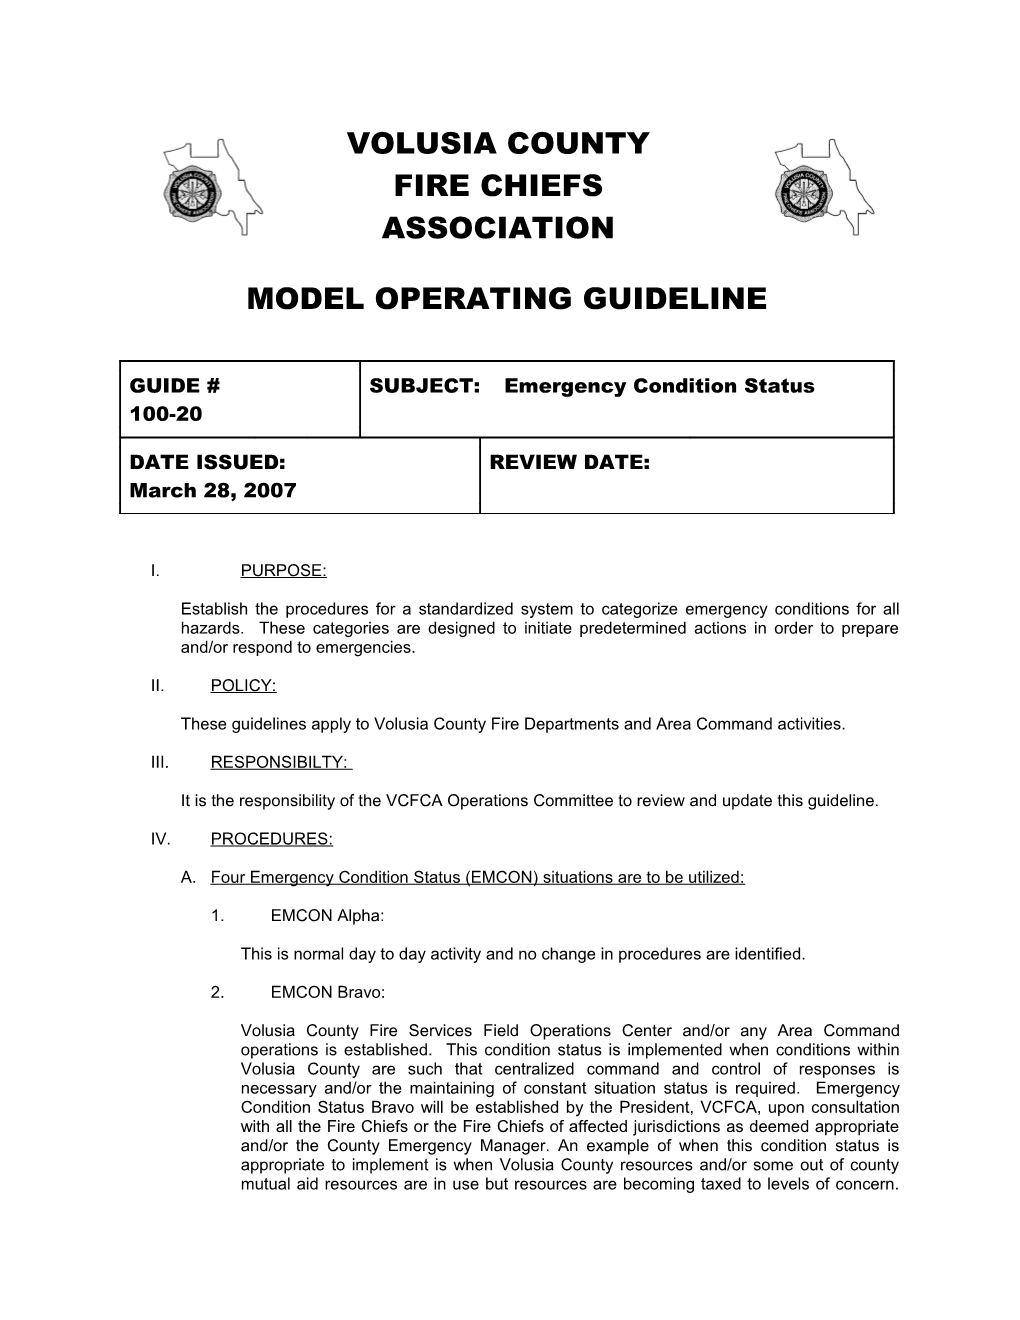 These Guidelines Apply to Volusia County Fire Departments and Area Command Activities